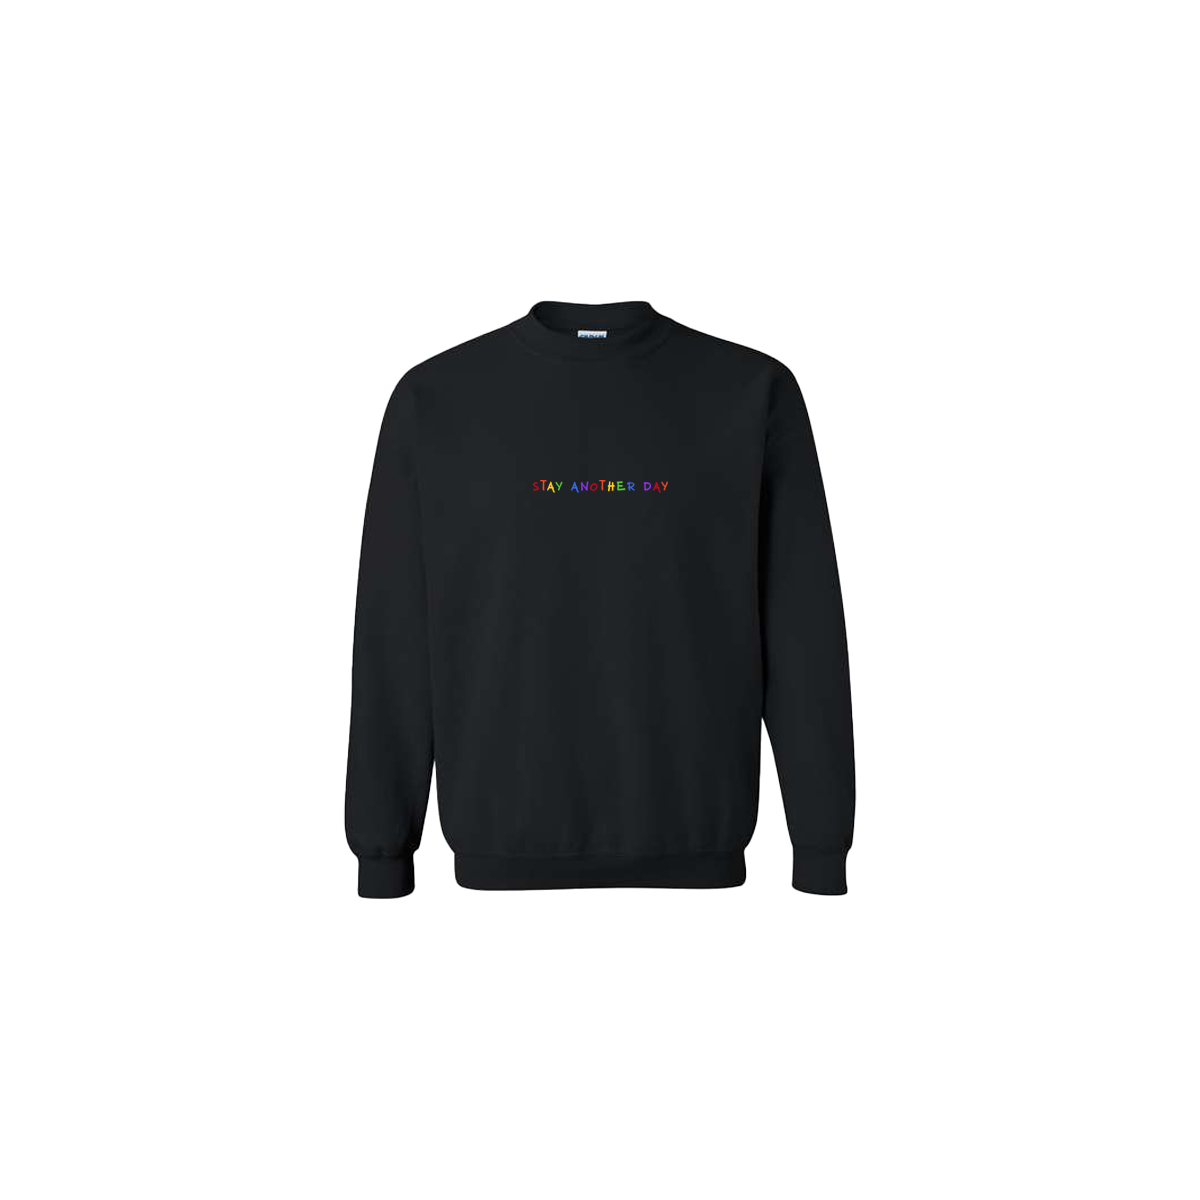 Stay Another Day Rainbow Embroidered Black Crewneck - Mental Health Awareness Clothing